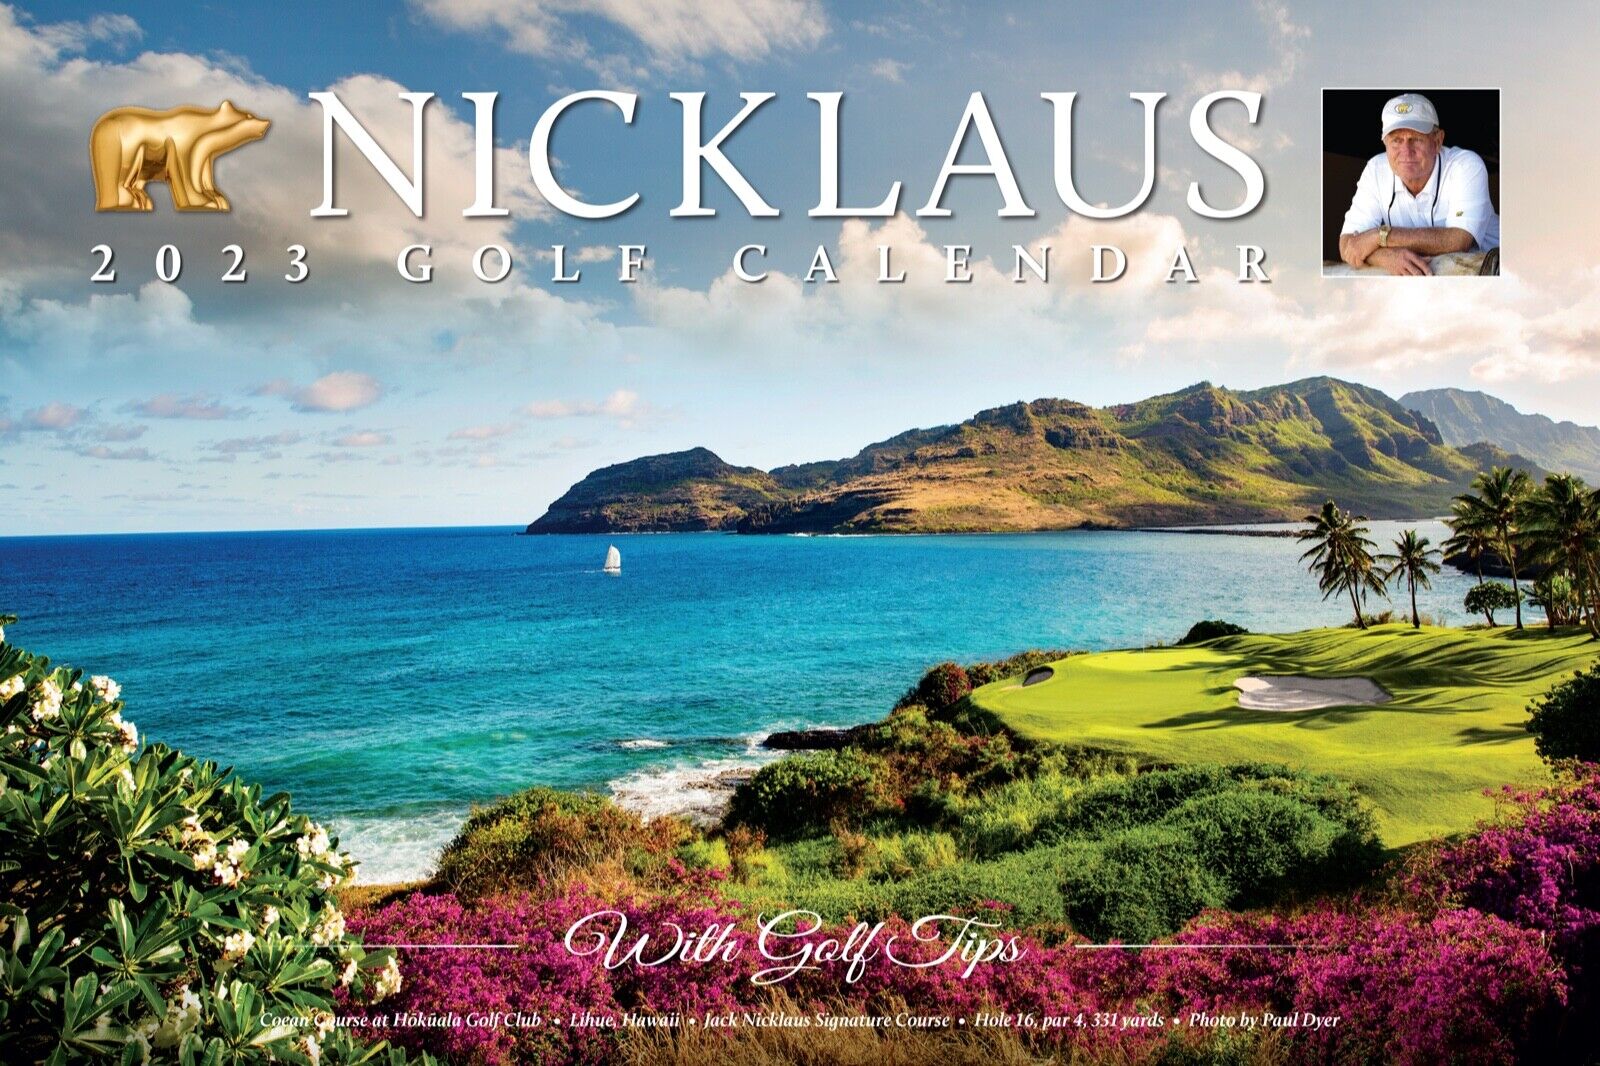 THE PERFECT GOLF GIFT — 2023 Nicklaus Golf Calender